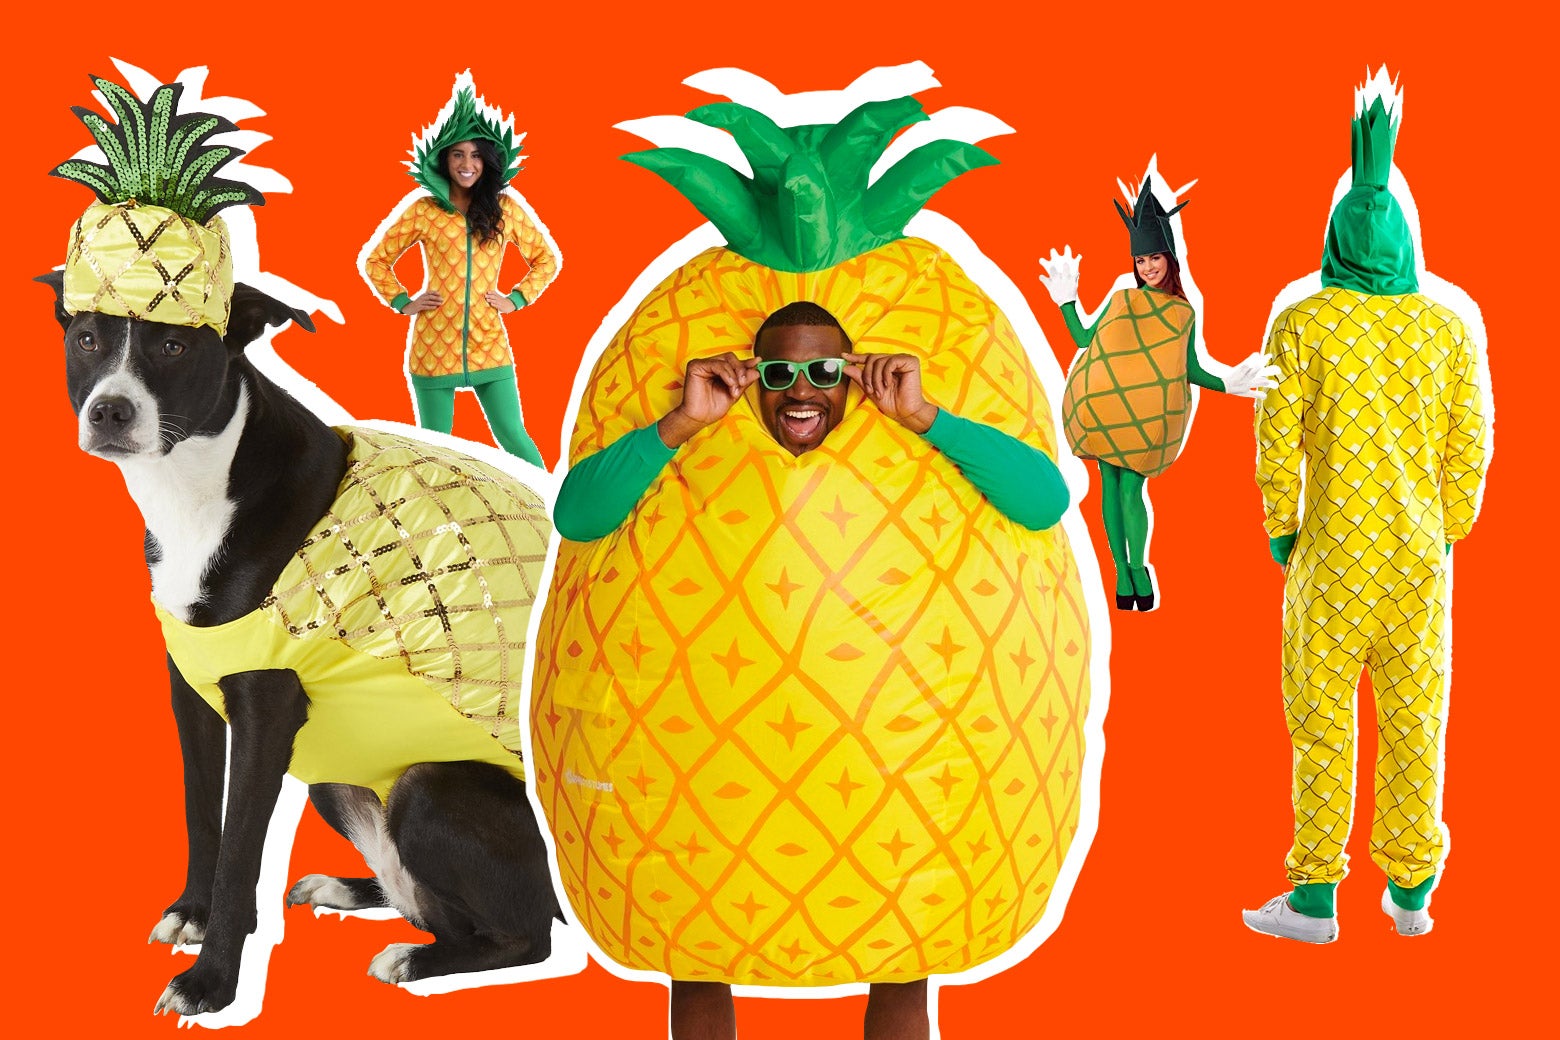 Pineapple Halloween costume: why it's the best for 2018.